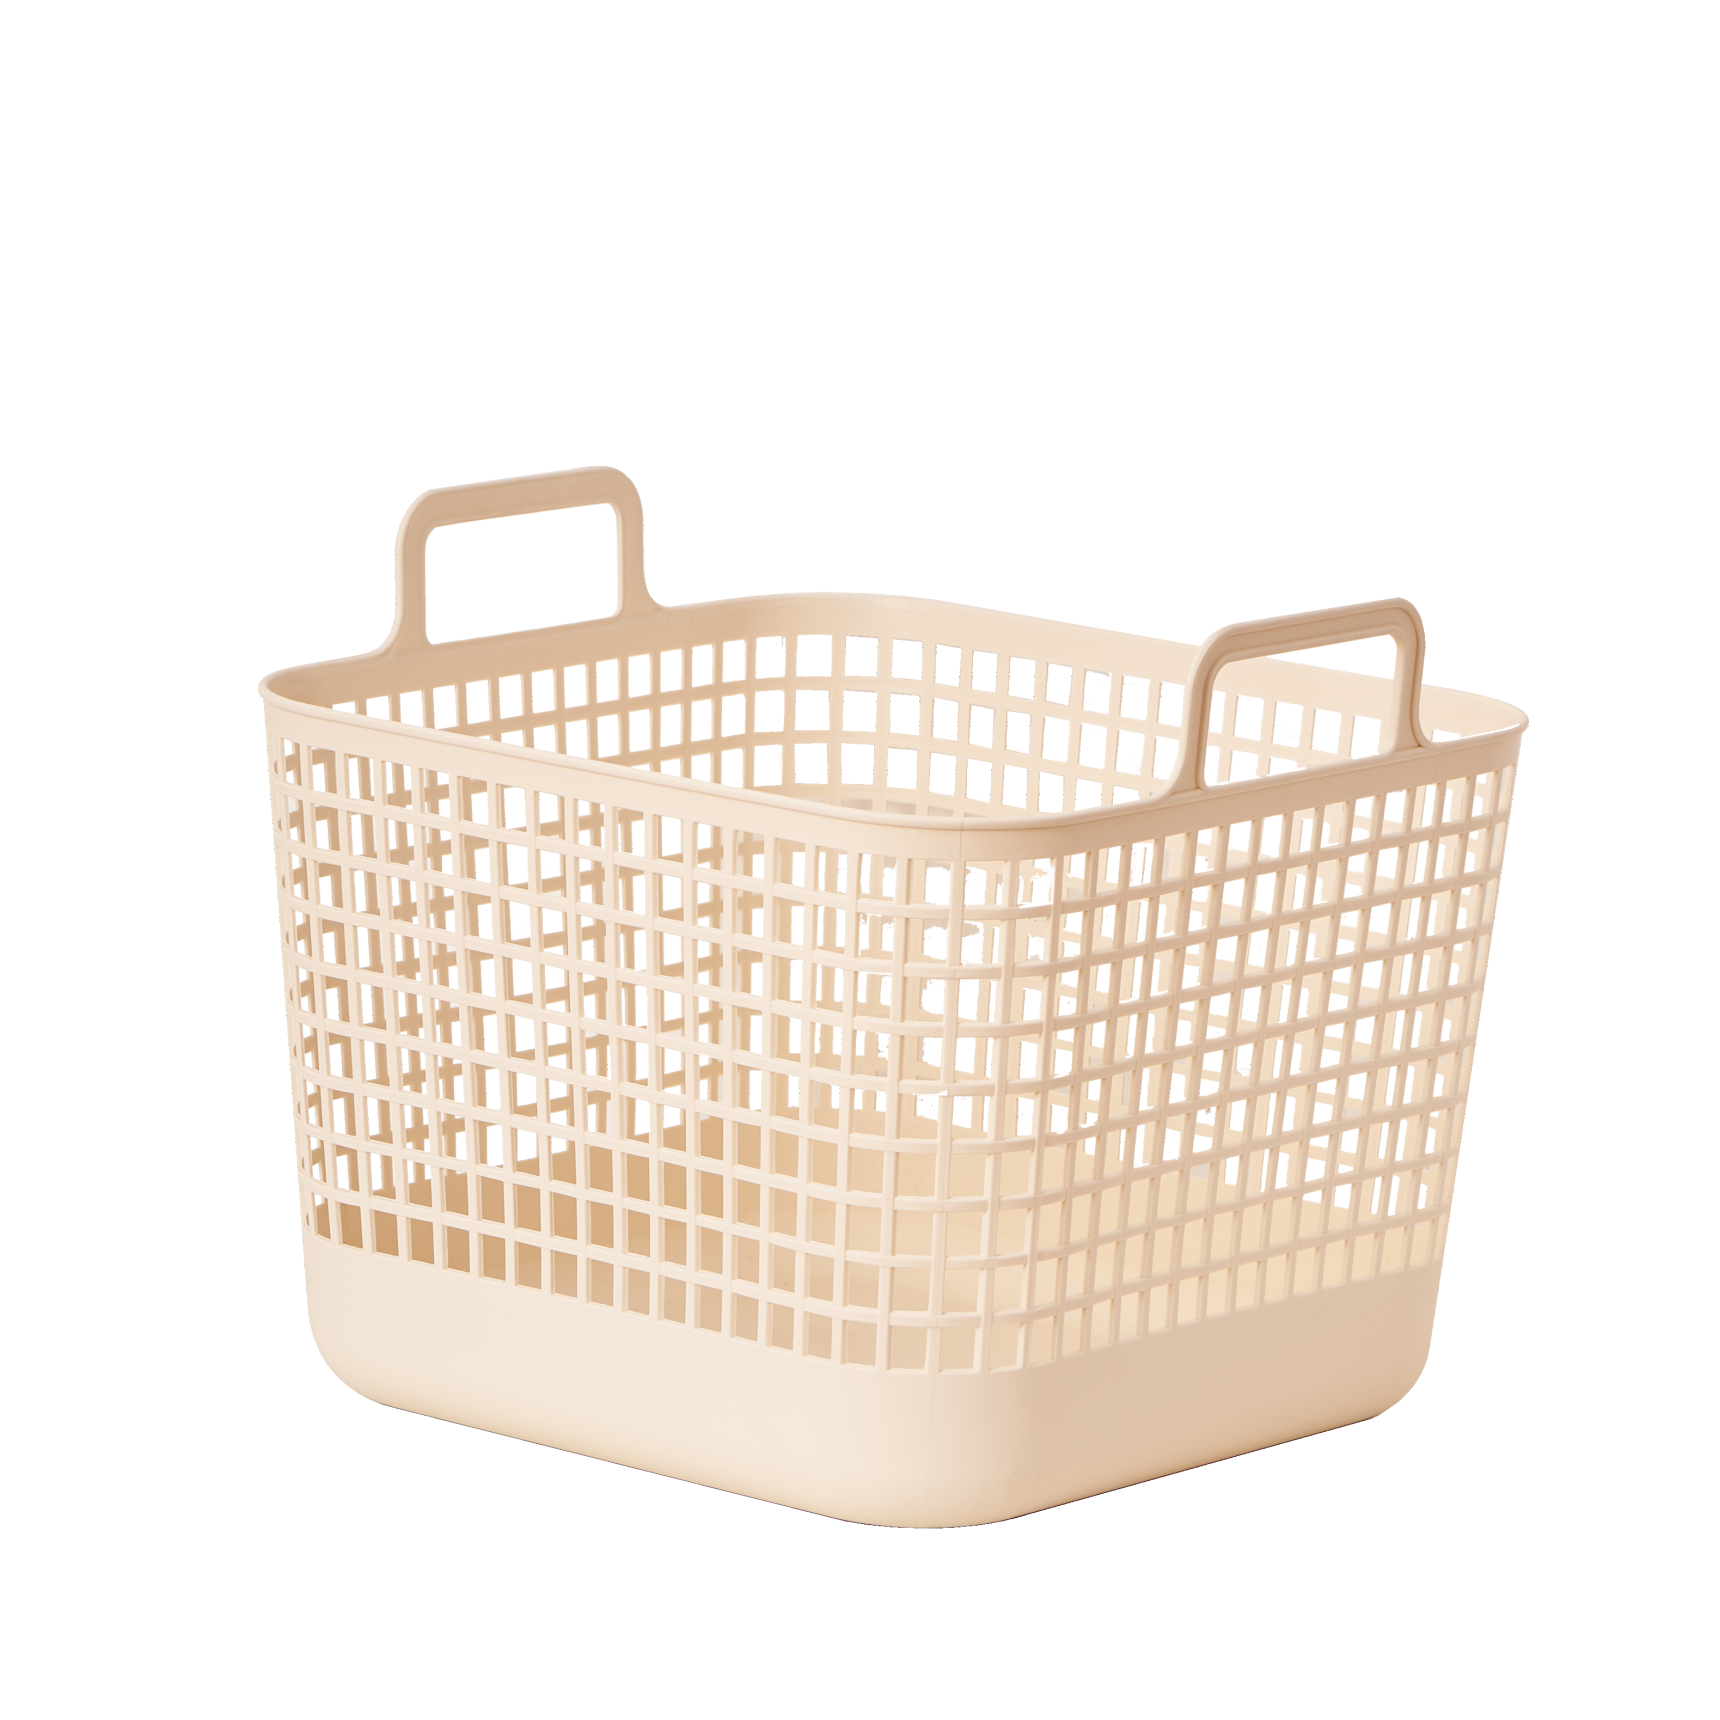 Imitation bamboo woven storage basket with various specifications available